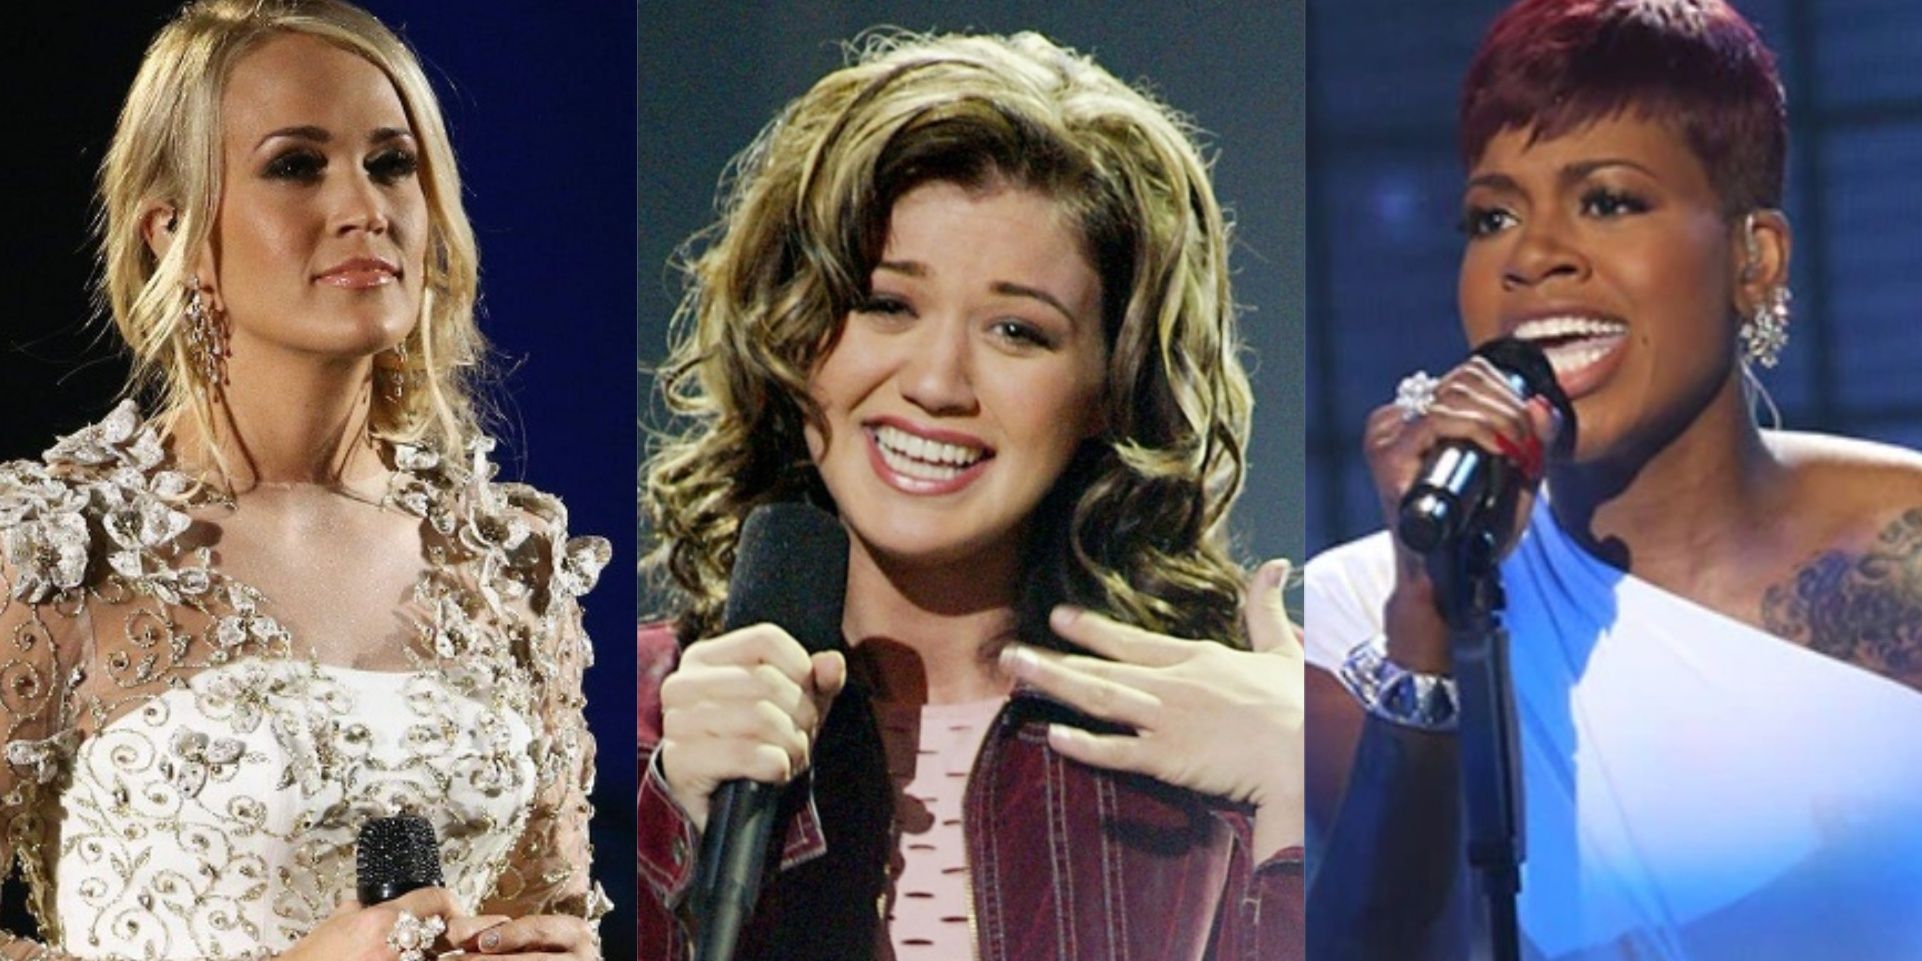 Split images of Carrie Underwood, Kelly Clarkson, and Fantasia singing in American Idol